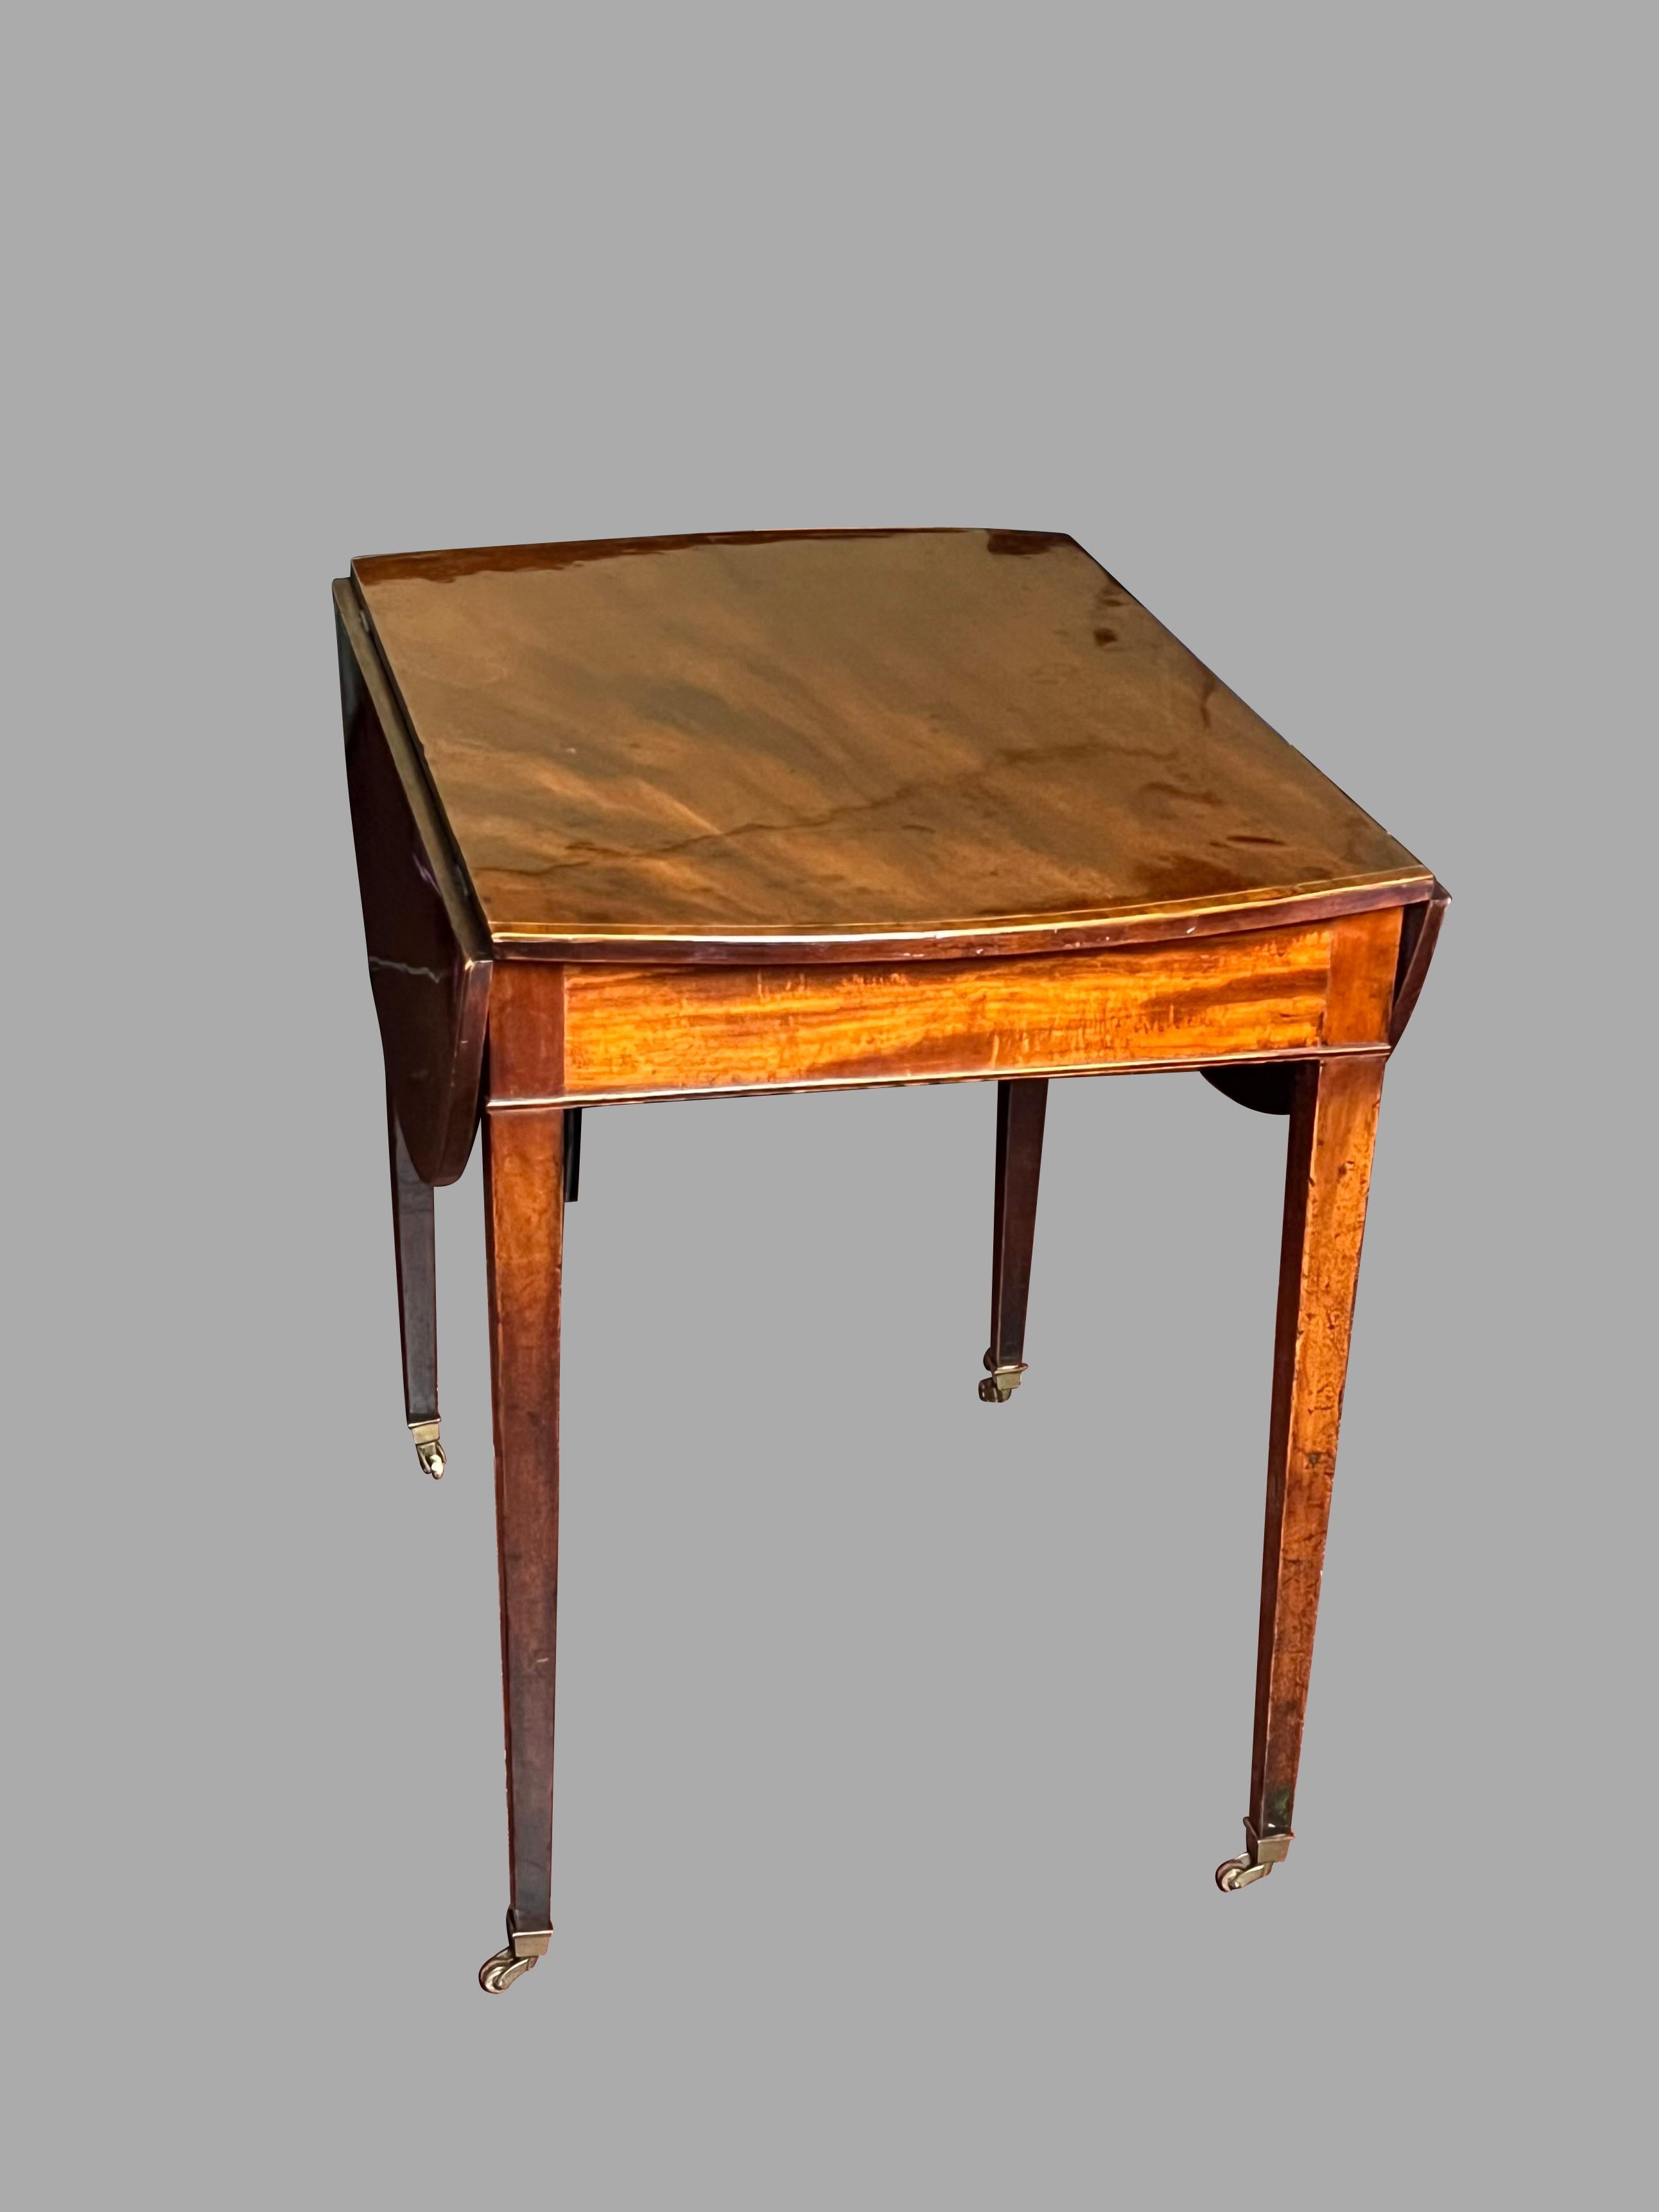 Fine English Inlaid Mahogany Hepplewhite Period Pembroke Table with Drawer For Sale 1